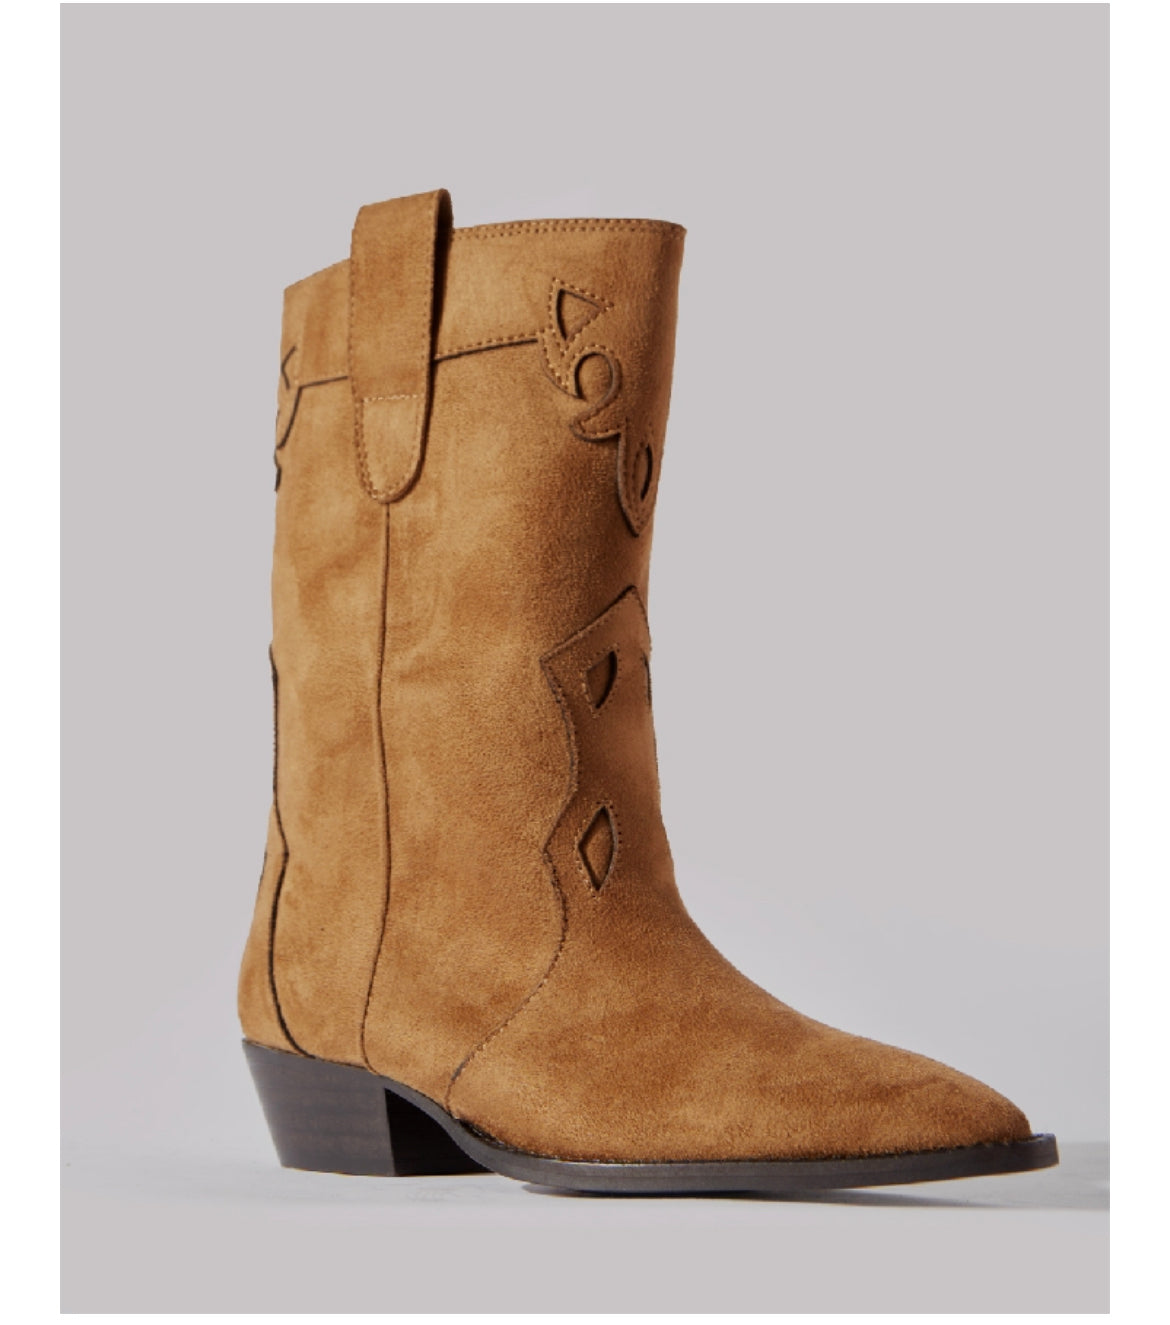 Lola camel ankle boot